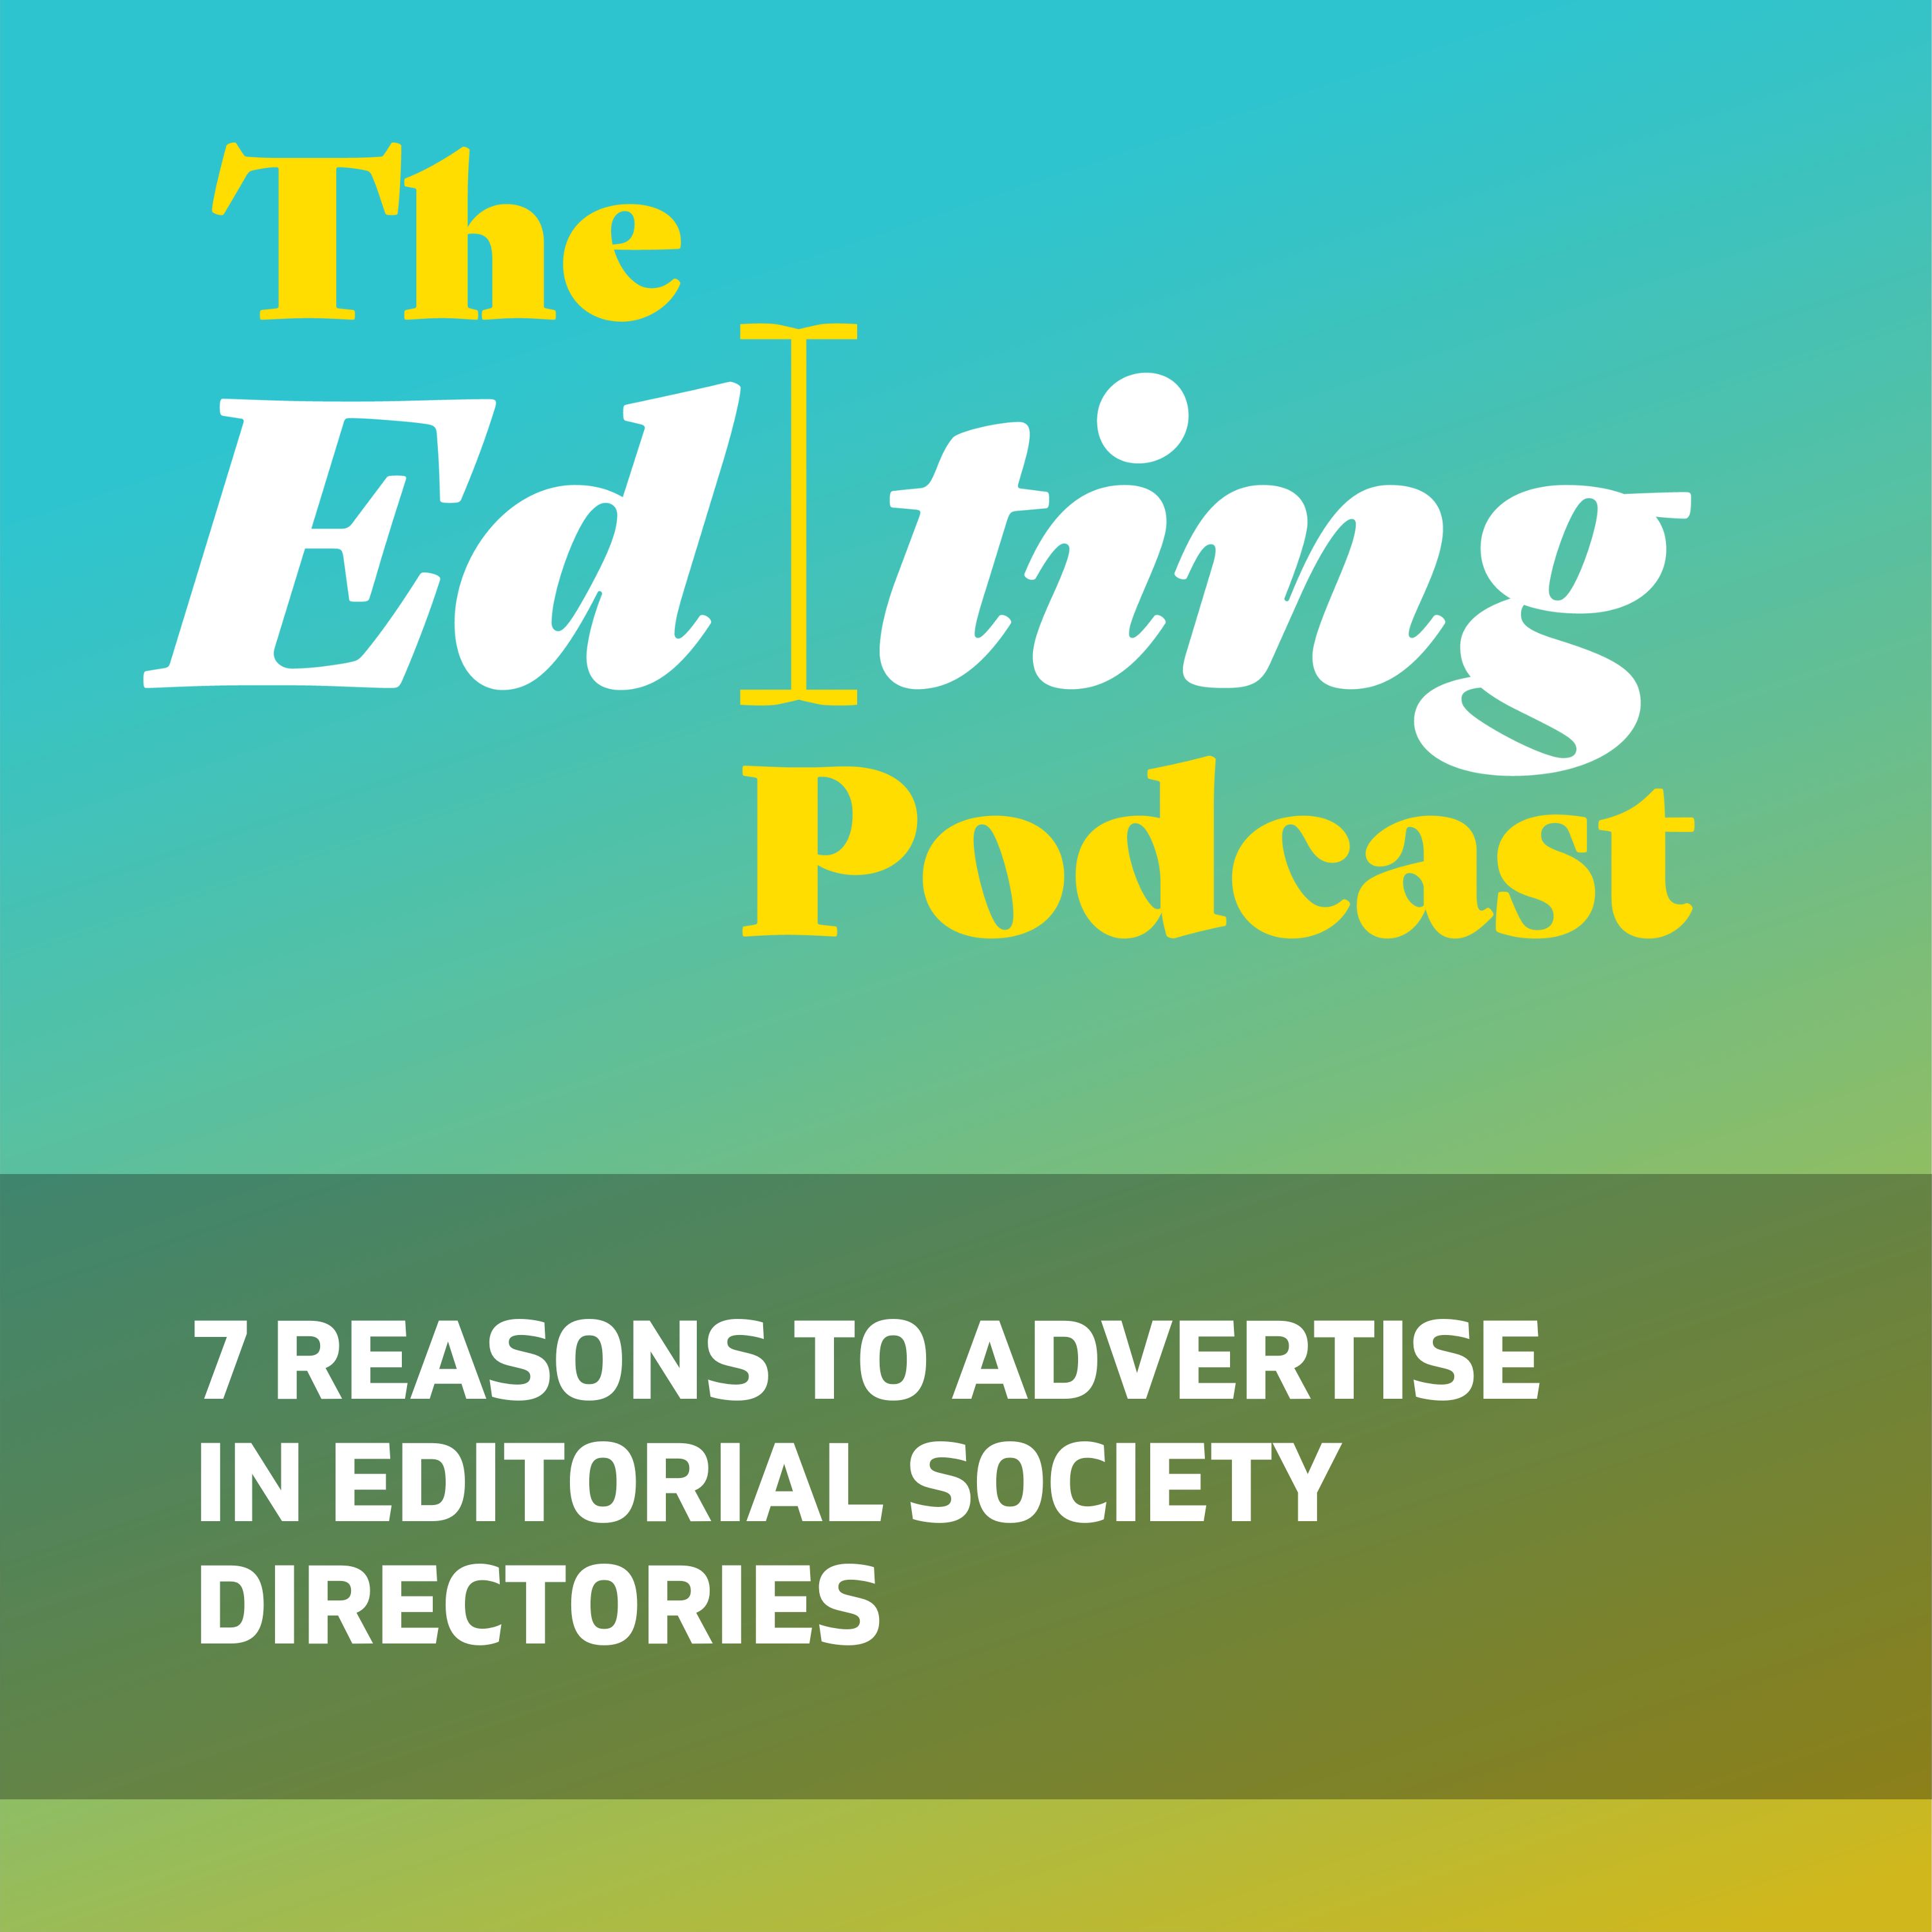 7 reasons to advertise in editorial society directories